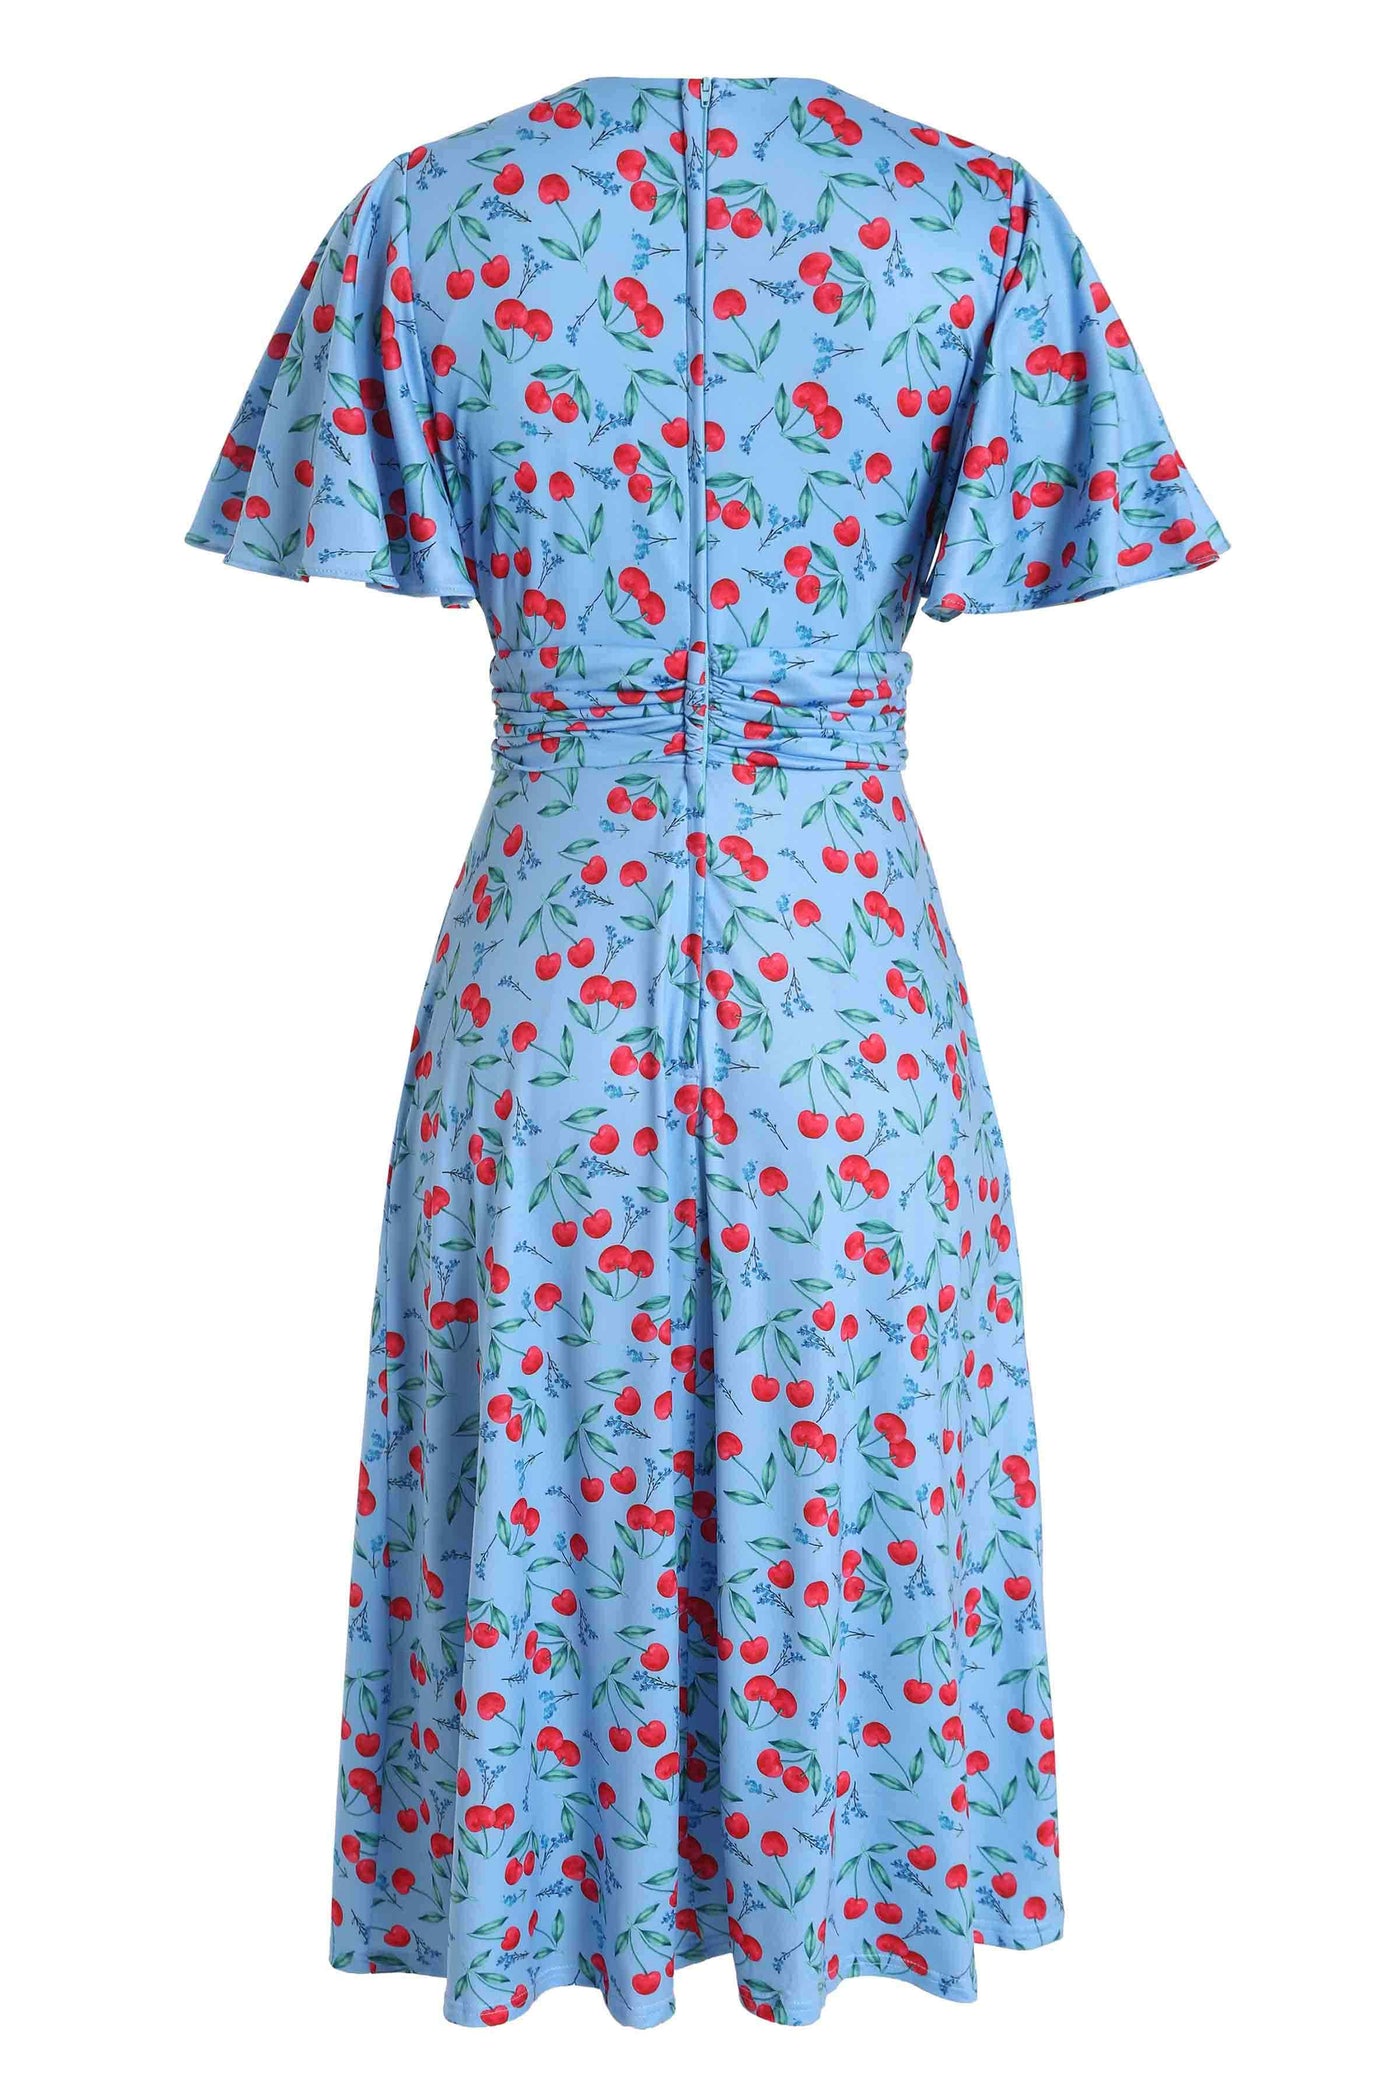 Back view of Cherry Print Summer Tea Dress in Blue